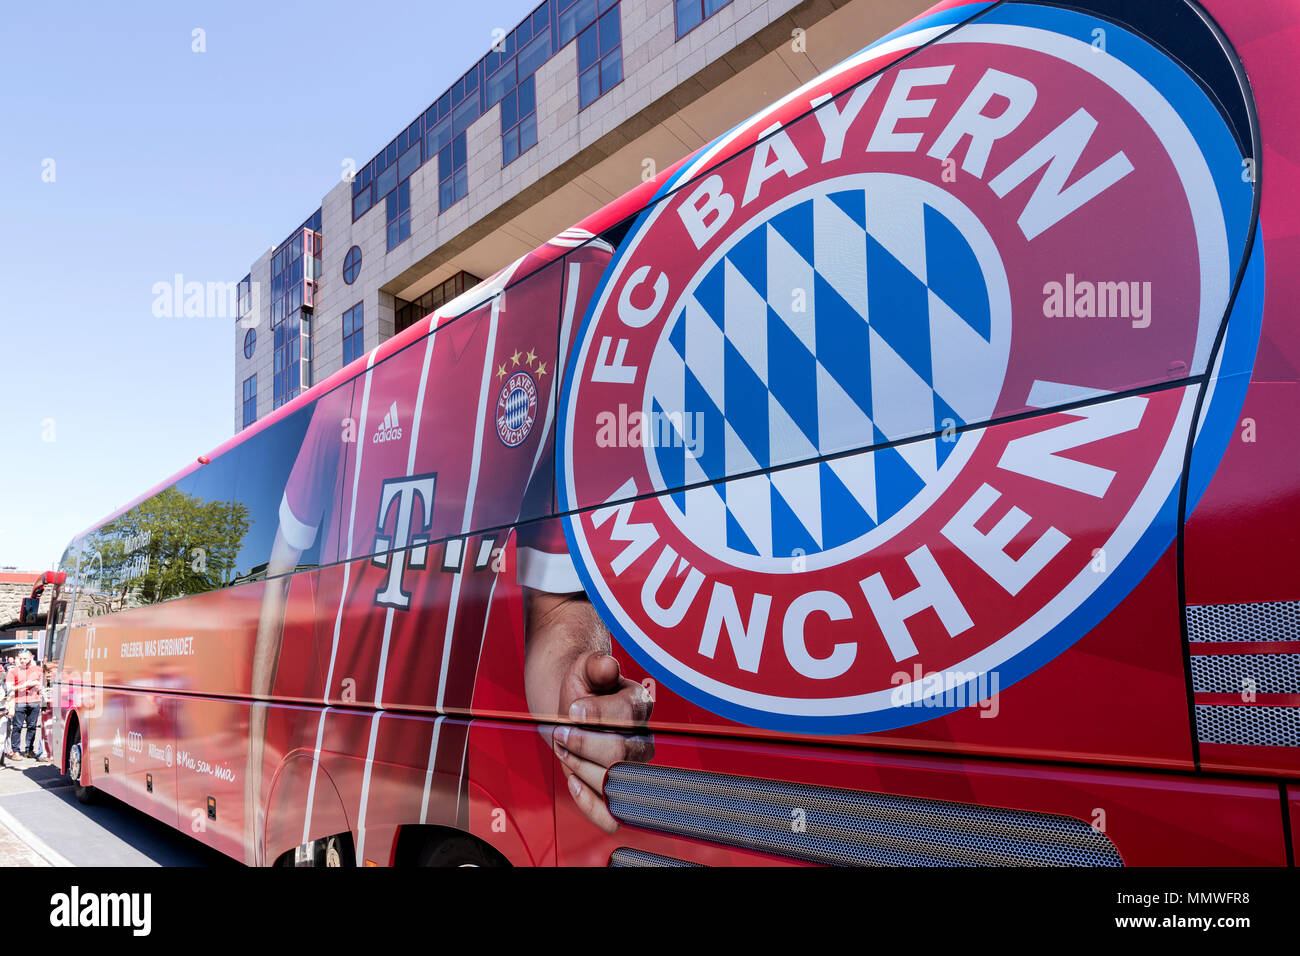 team bus of the FC Bayern Munich football department. The FC Bayern the most successful club in German football history. Stock Photo